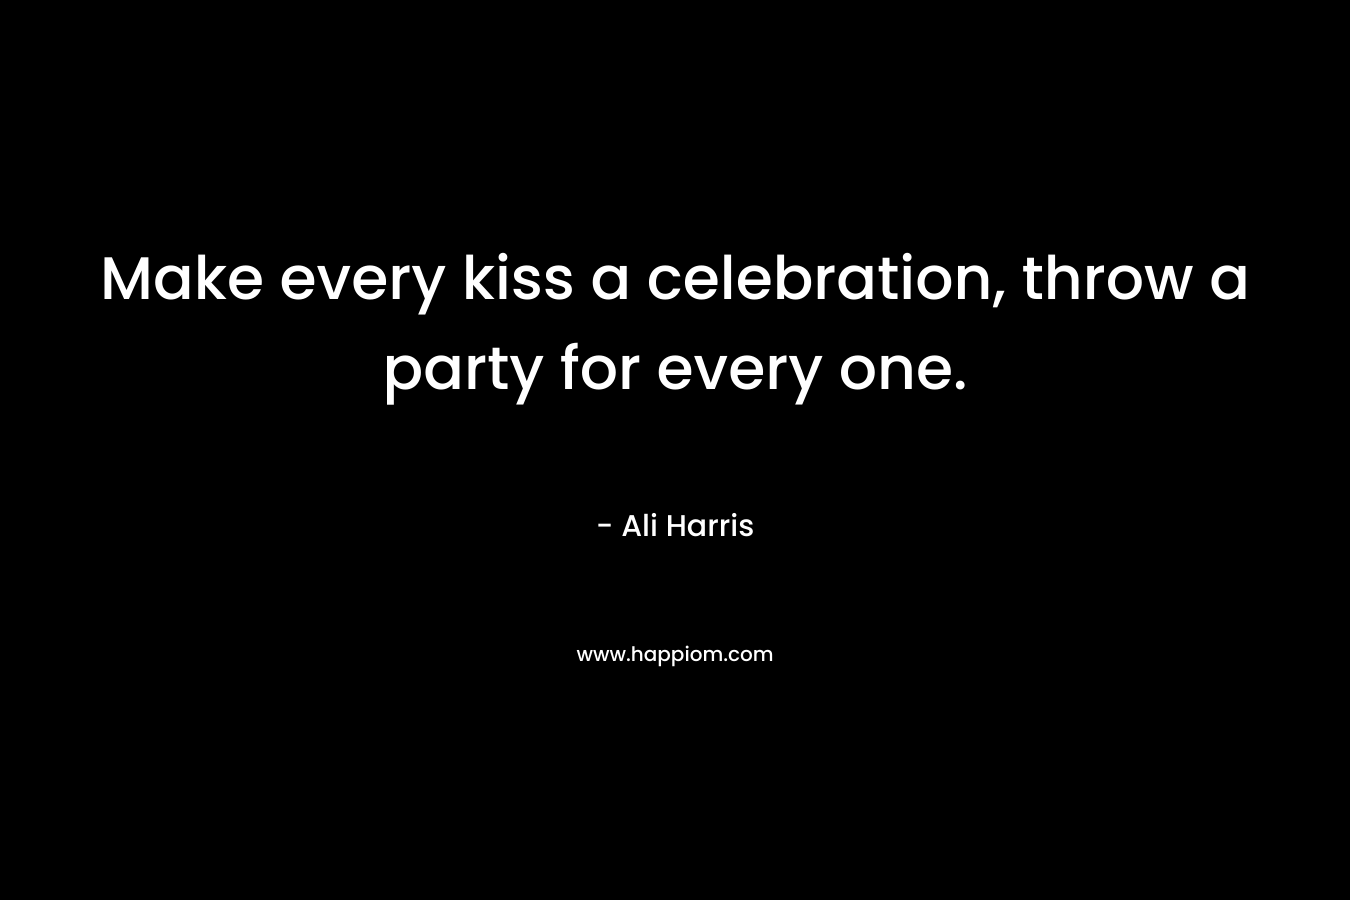 Make every kiss a celebration, throw a party for every one.